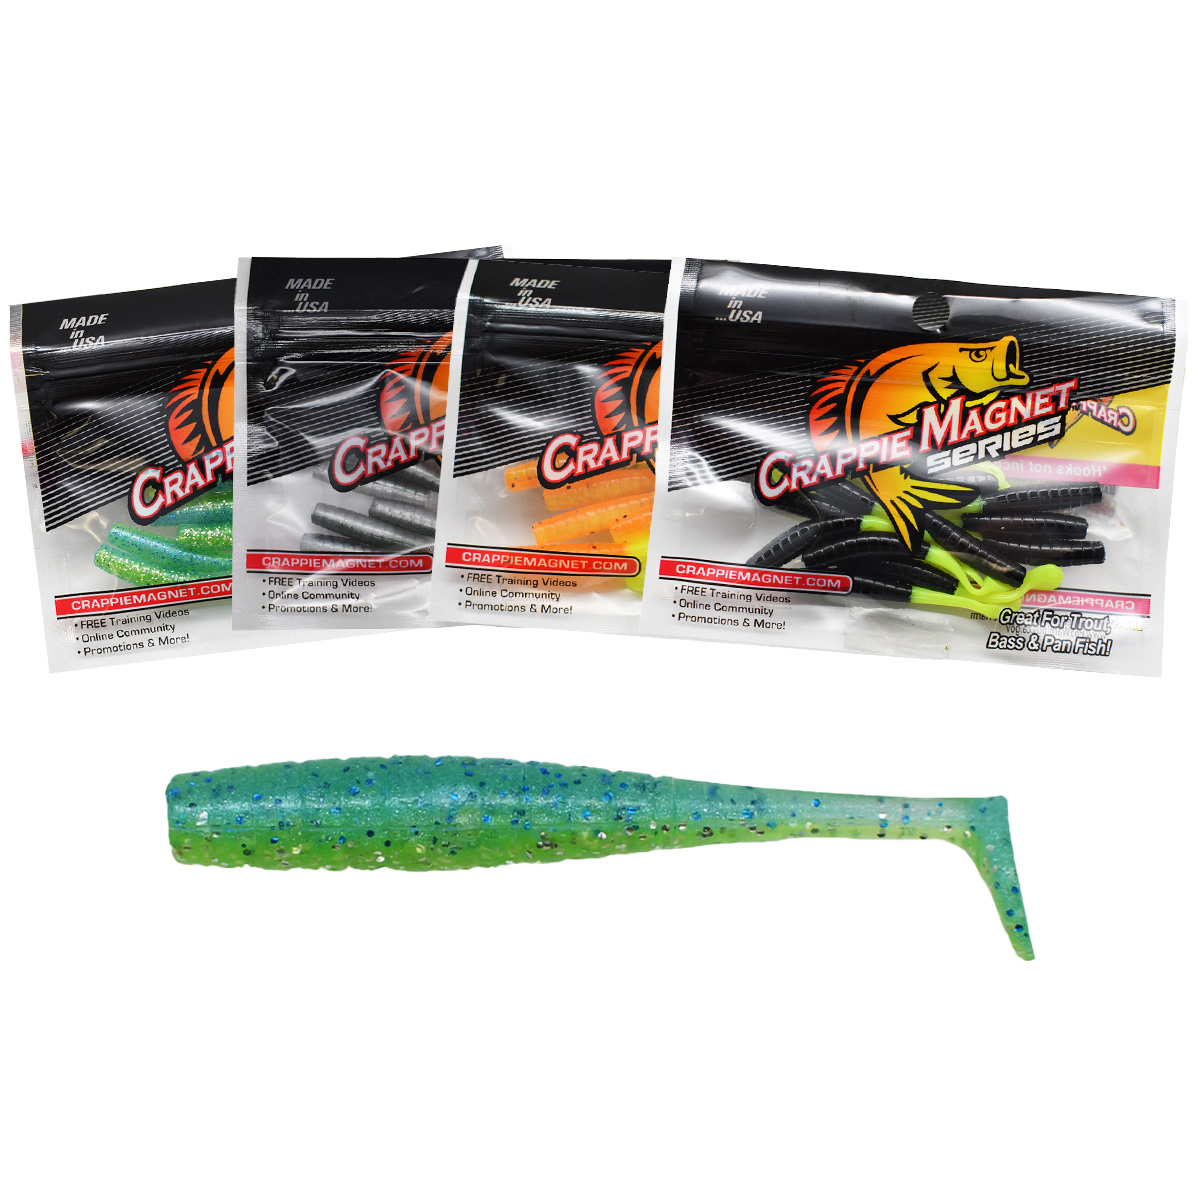 Tiny Dancer 12pc Pack - CRAPPIE MAGNET